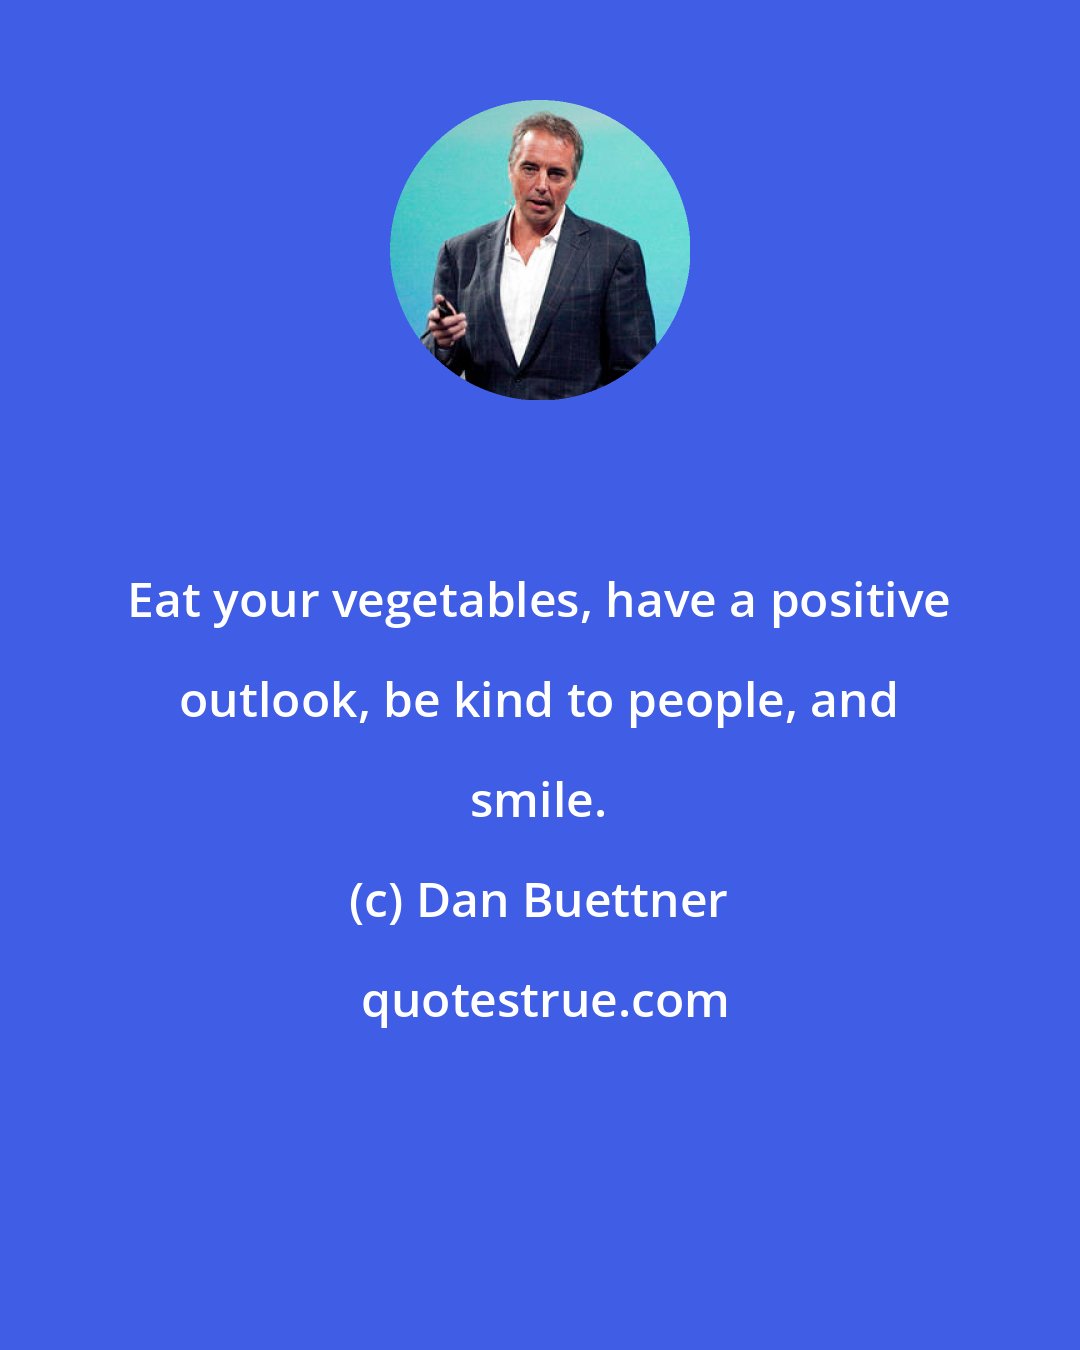 Dan Buettner: Eat your vegetables, have a positive outlook, be kind to people, and smile.